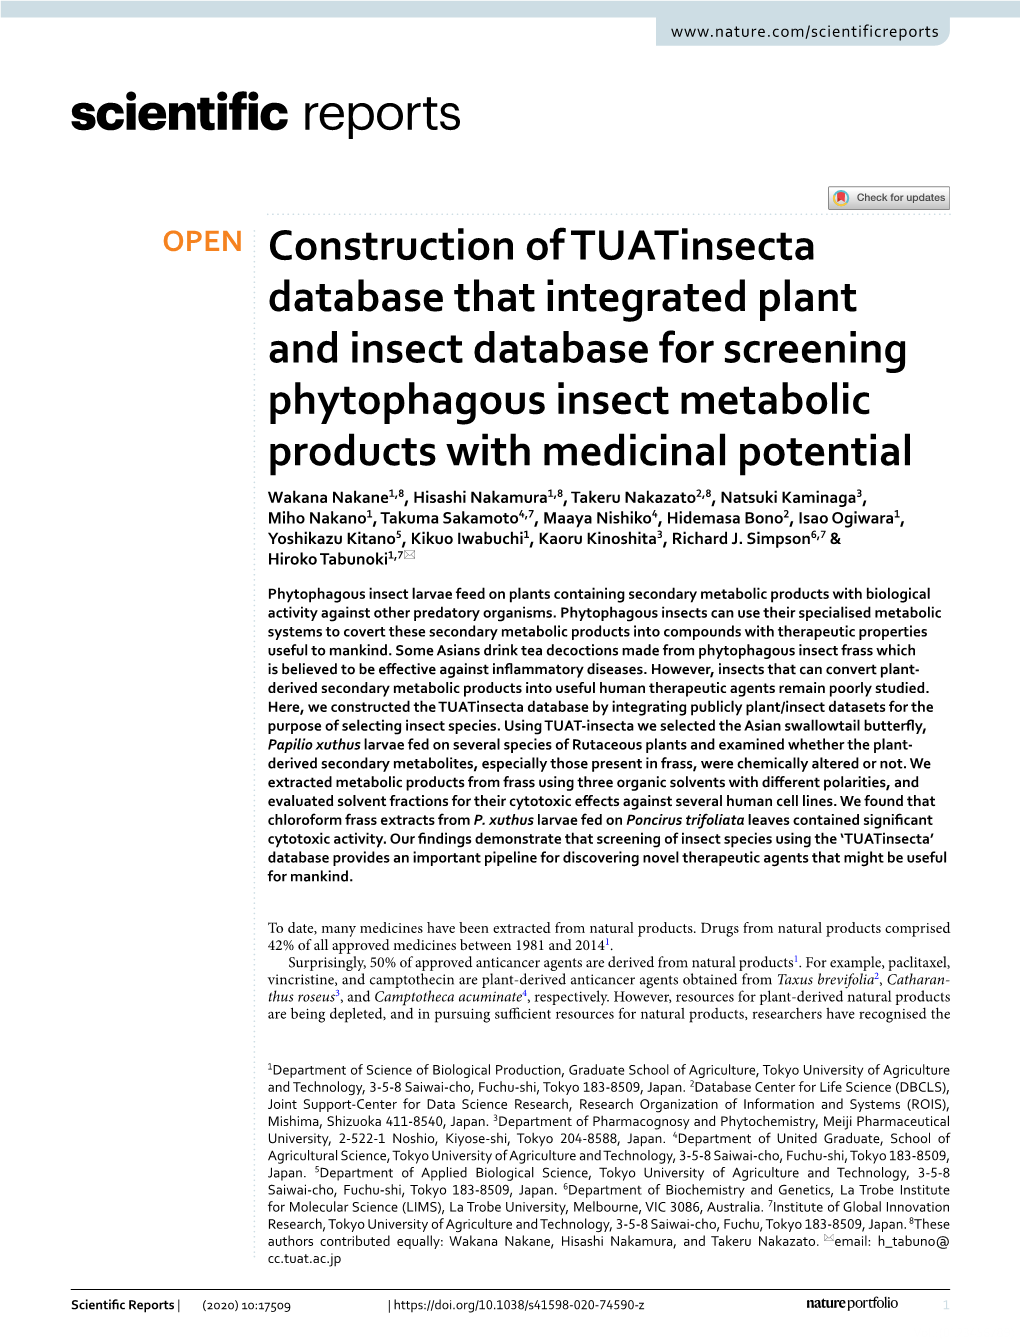 Construction of Tuatinsecta Database That Integrated Plant and Insect Database for Screening Phytophagous Insect Metabolic Produ